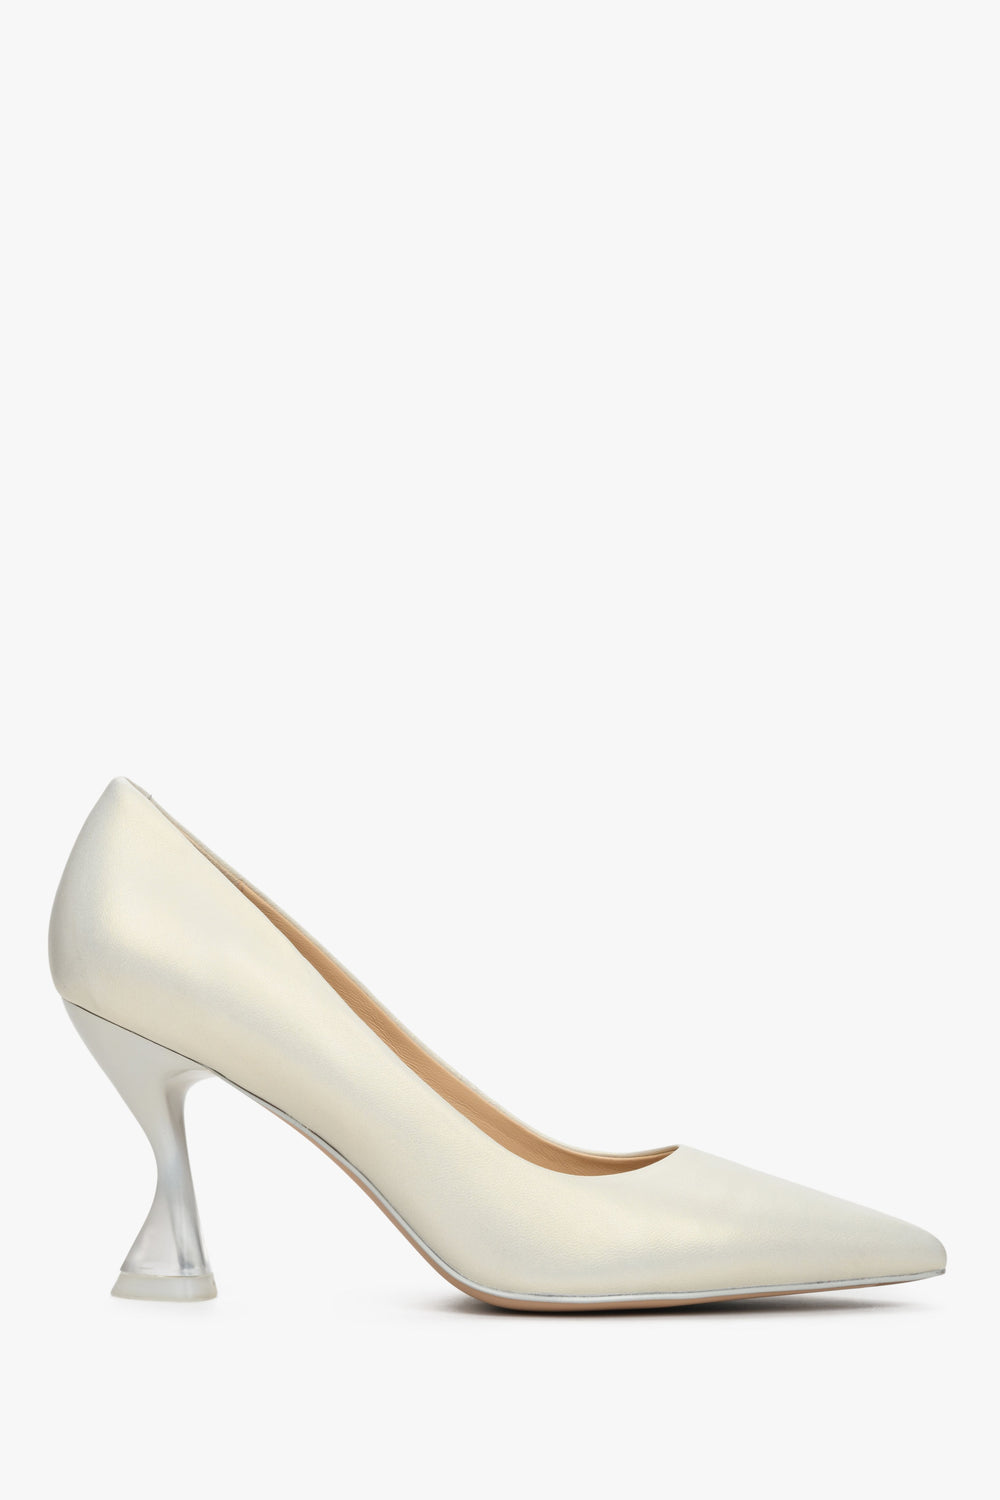 Women's Pearlescent High-Heeled Pumps made of Genuine Leather Estro ER00112787.